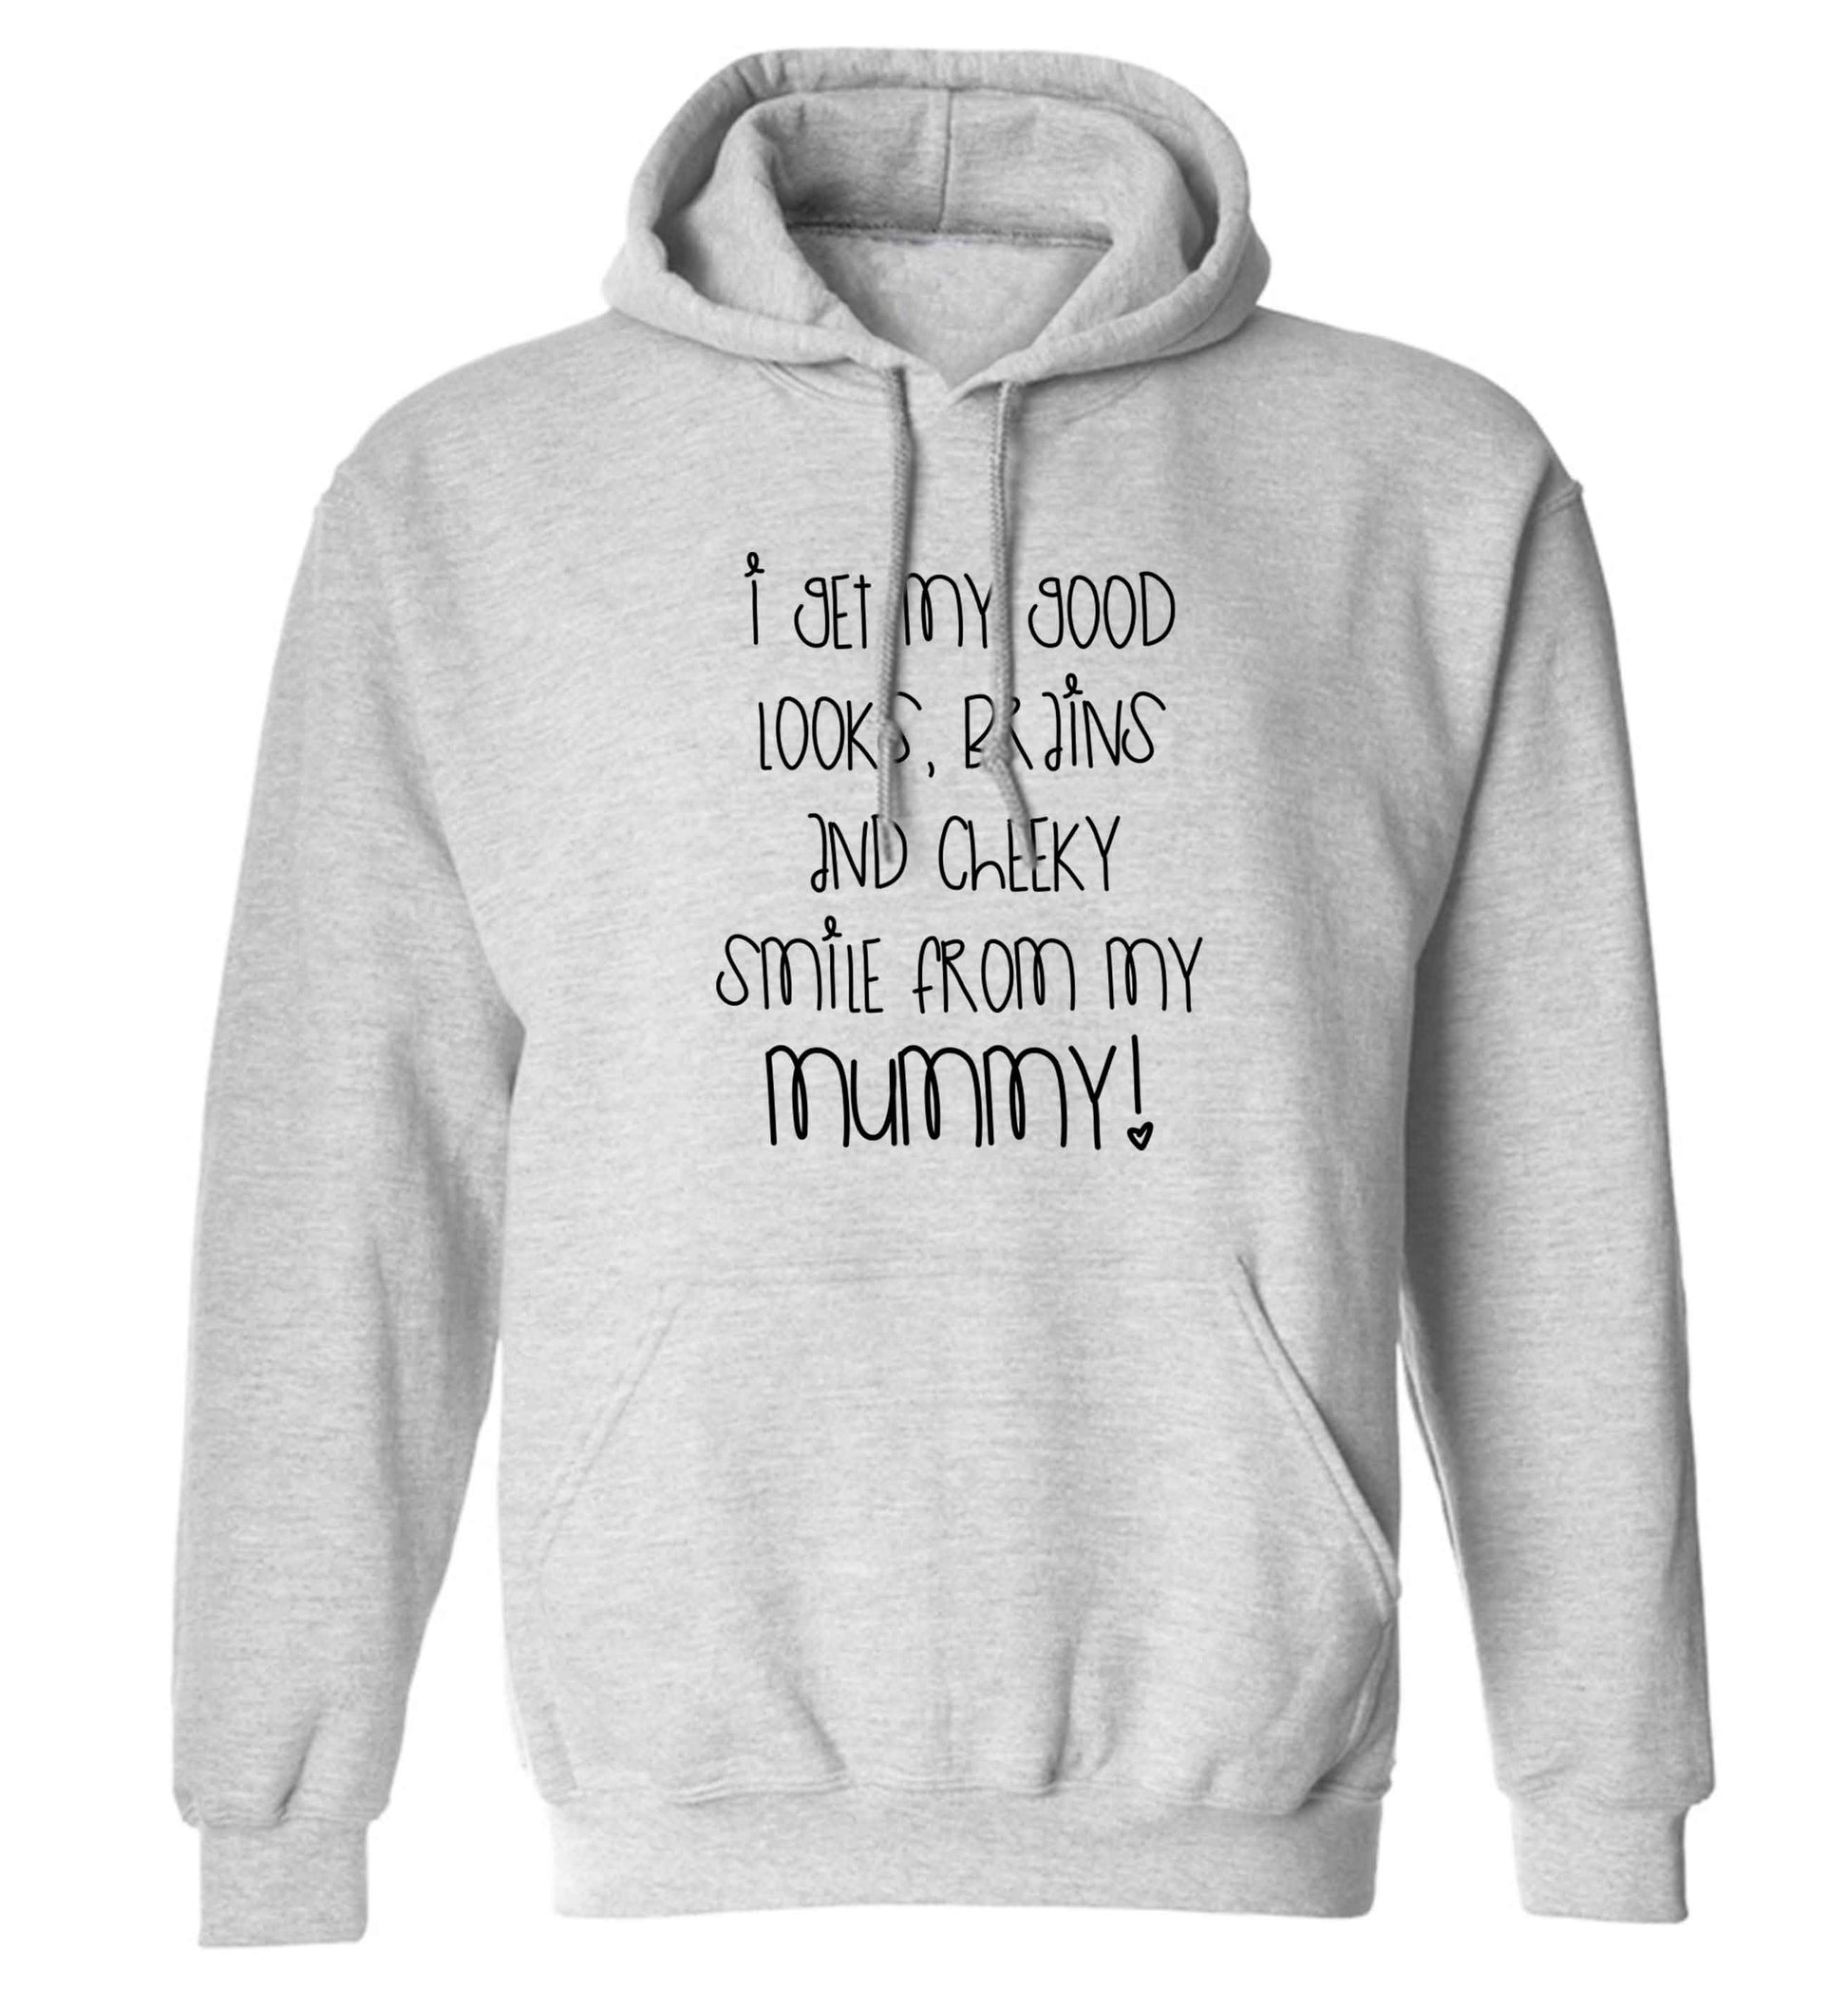 I get my good looks, brains and cheeky smile from my mummy adults unisex grey hoodie 2XL